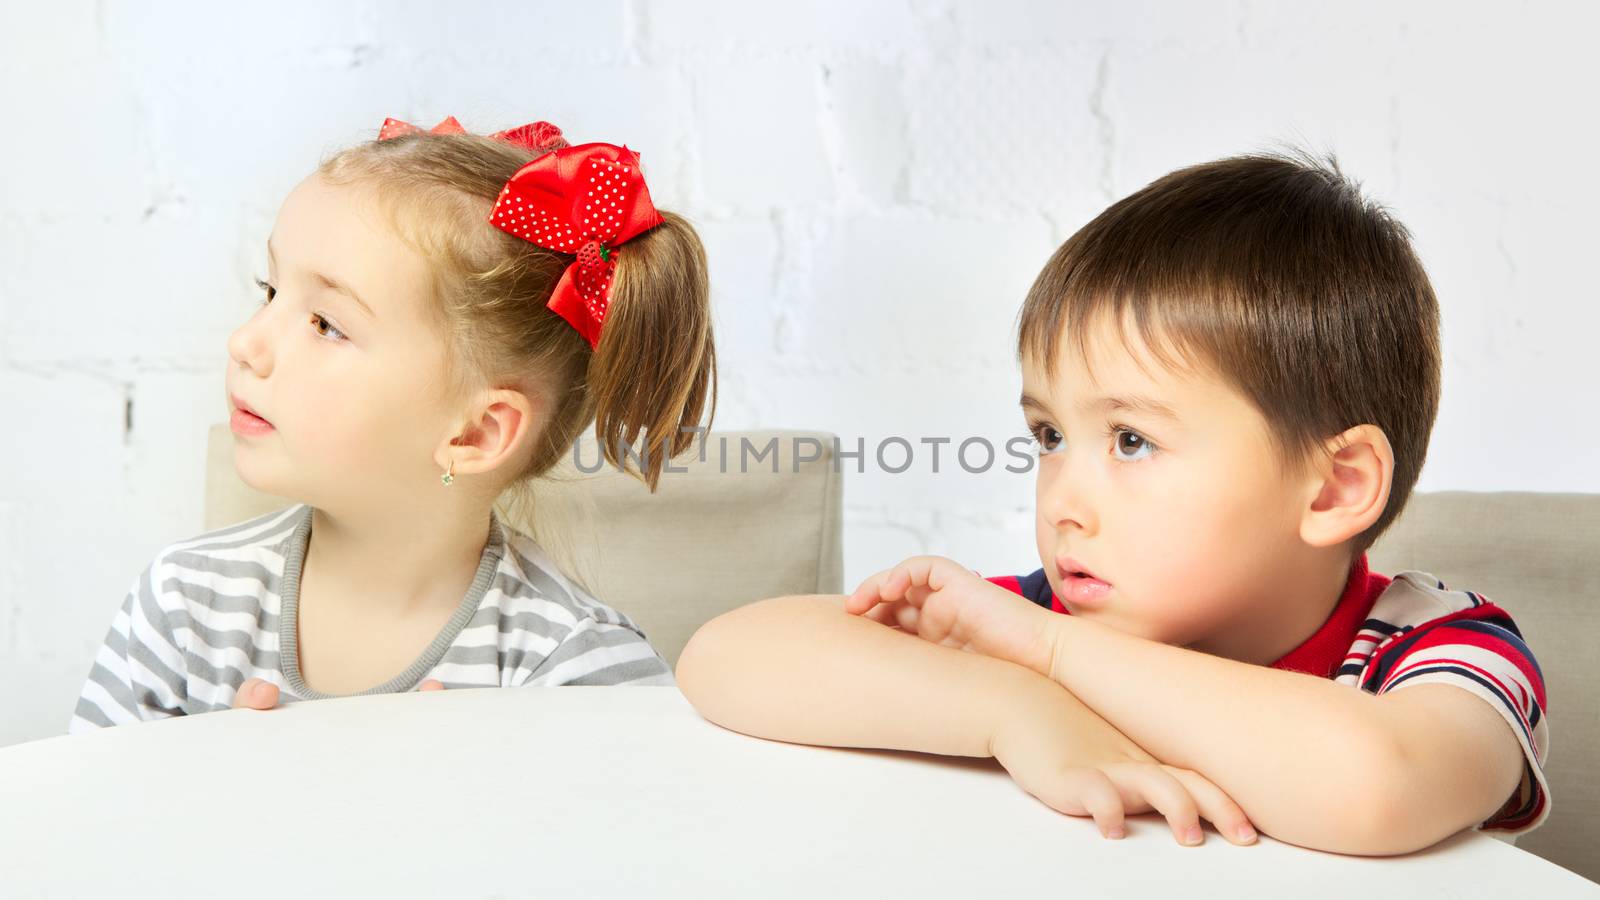 beautiful boy and girl with red bow-knot, portrait